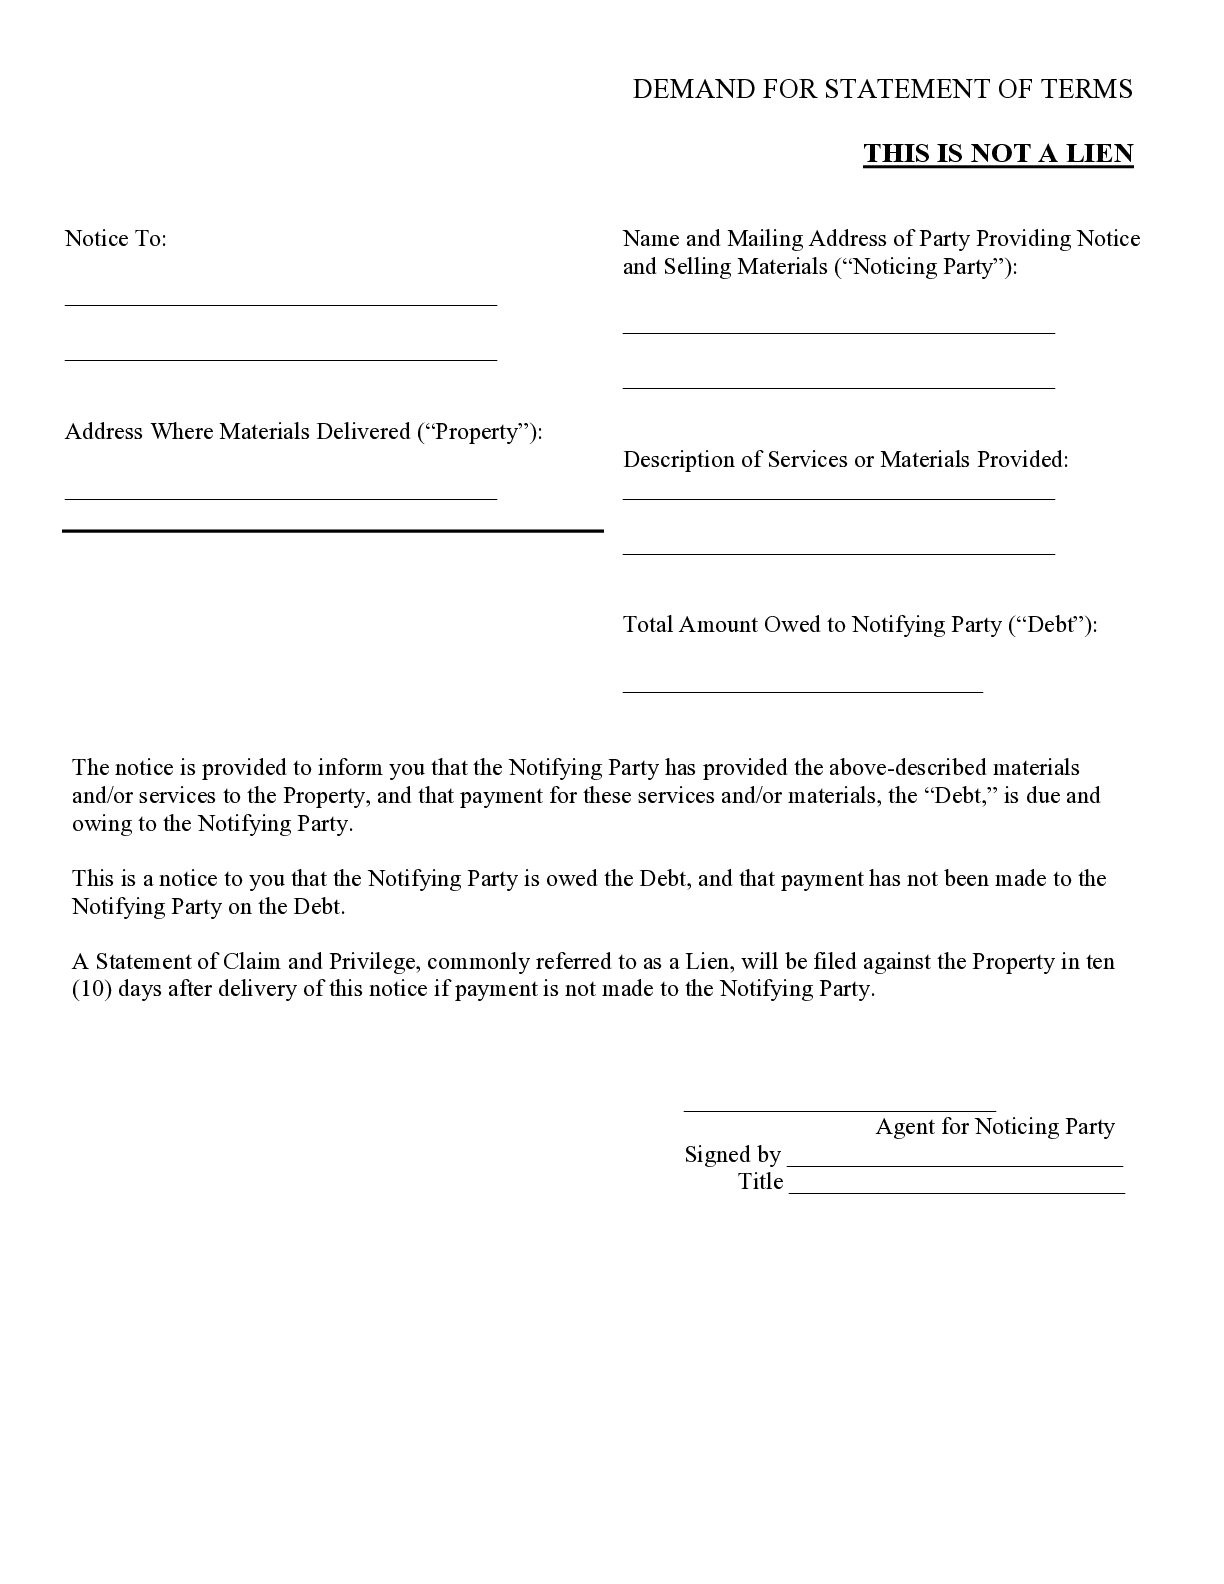 Louisiana Notice of Intent to Lien Form (Final Notice of Nonpayment) | Free Downloadable Template - free from